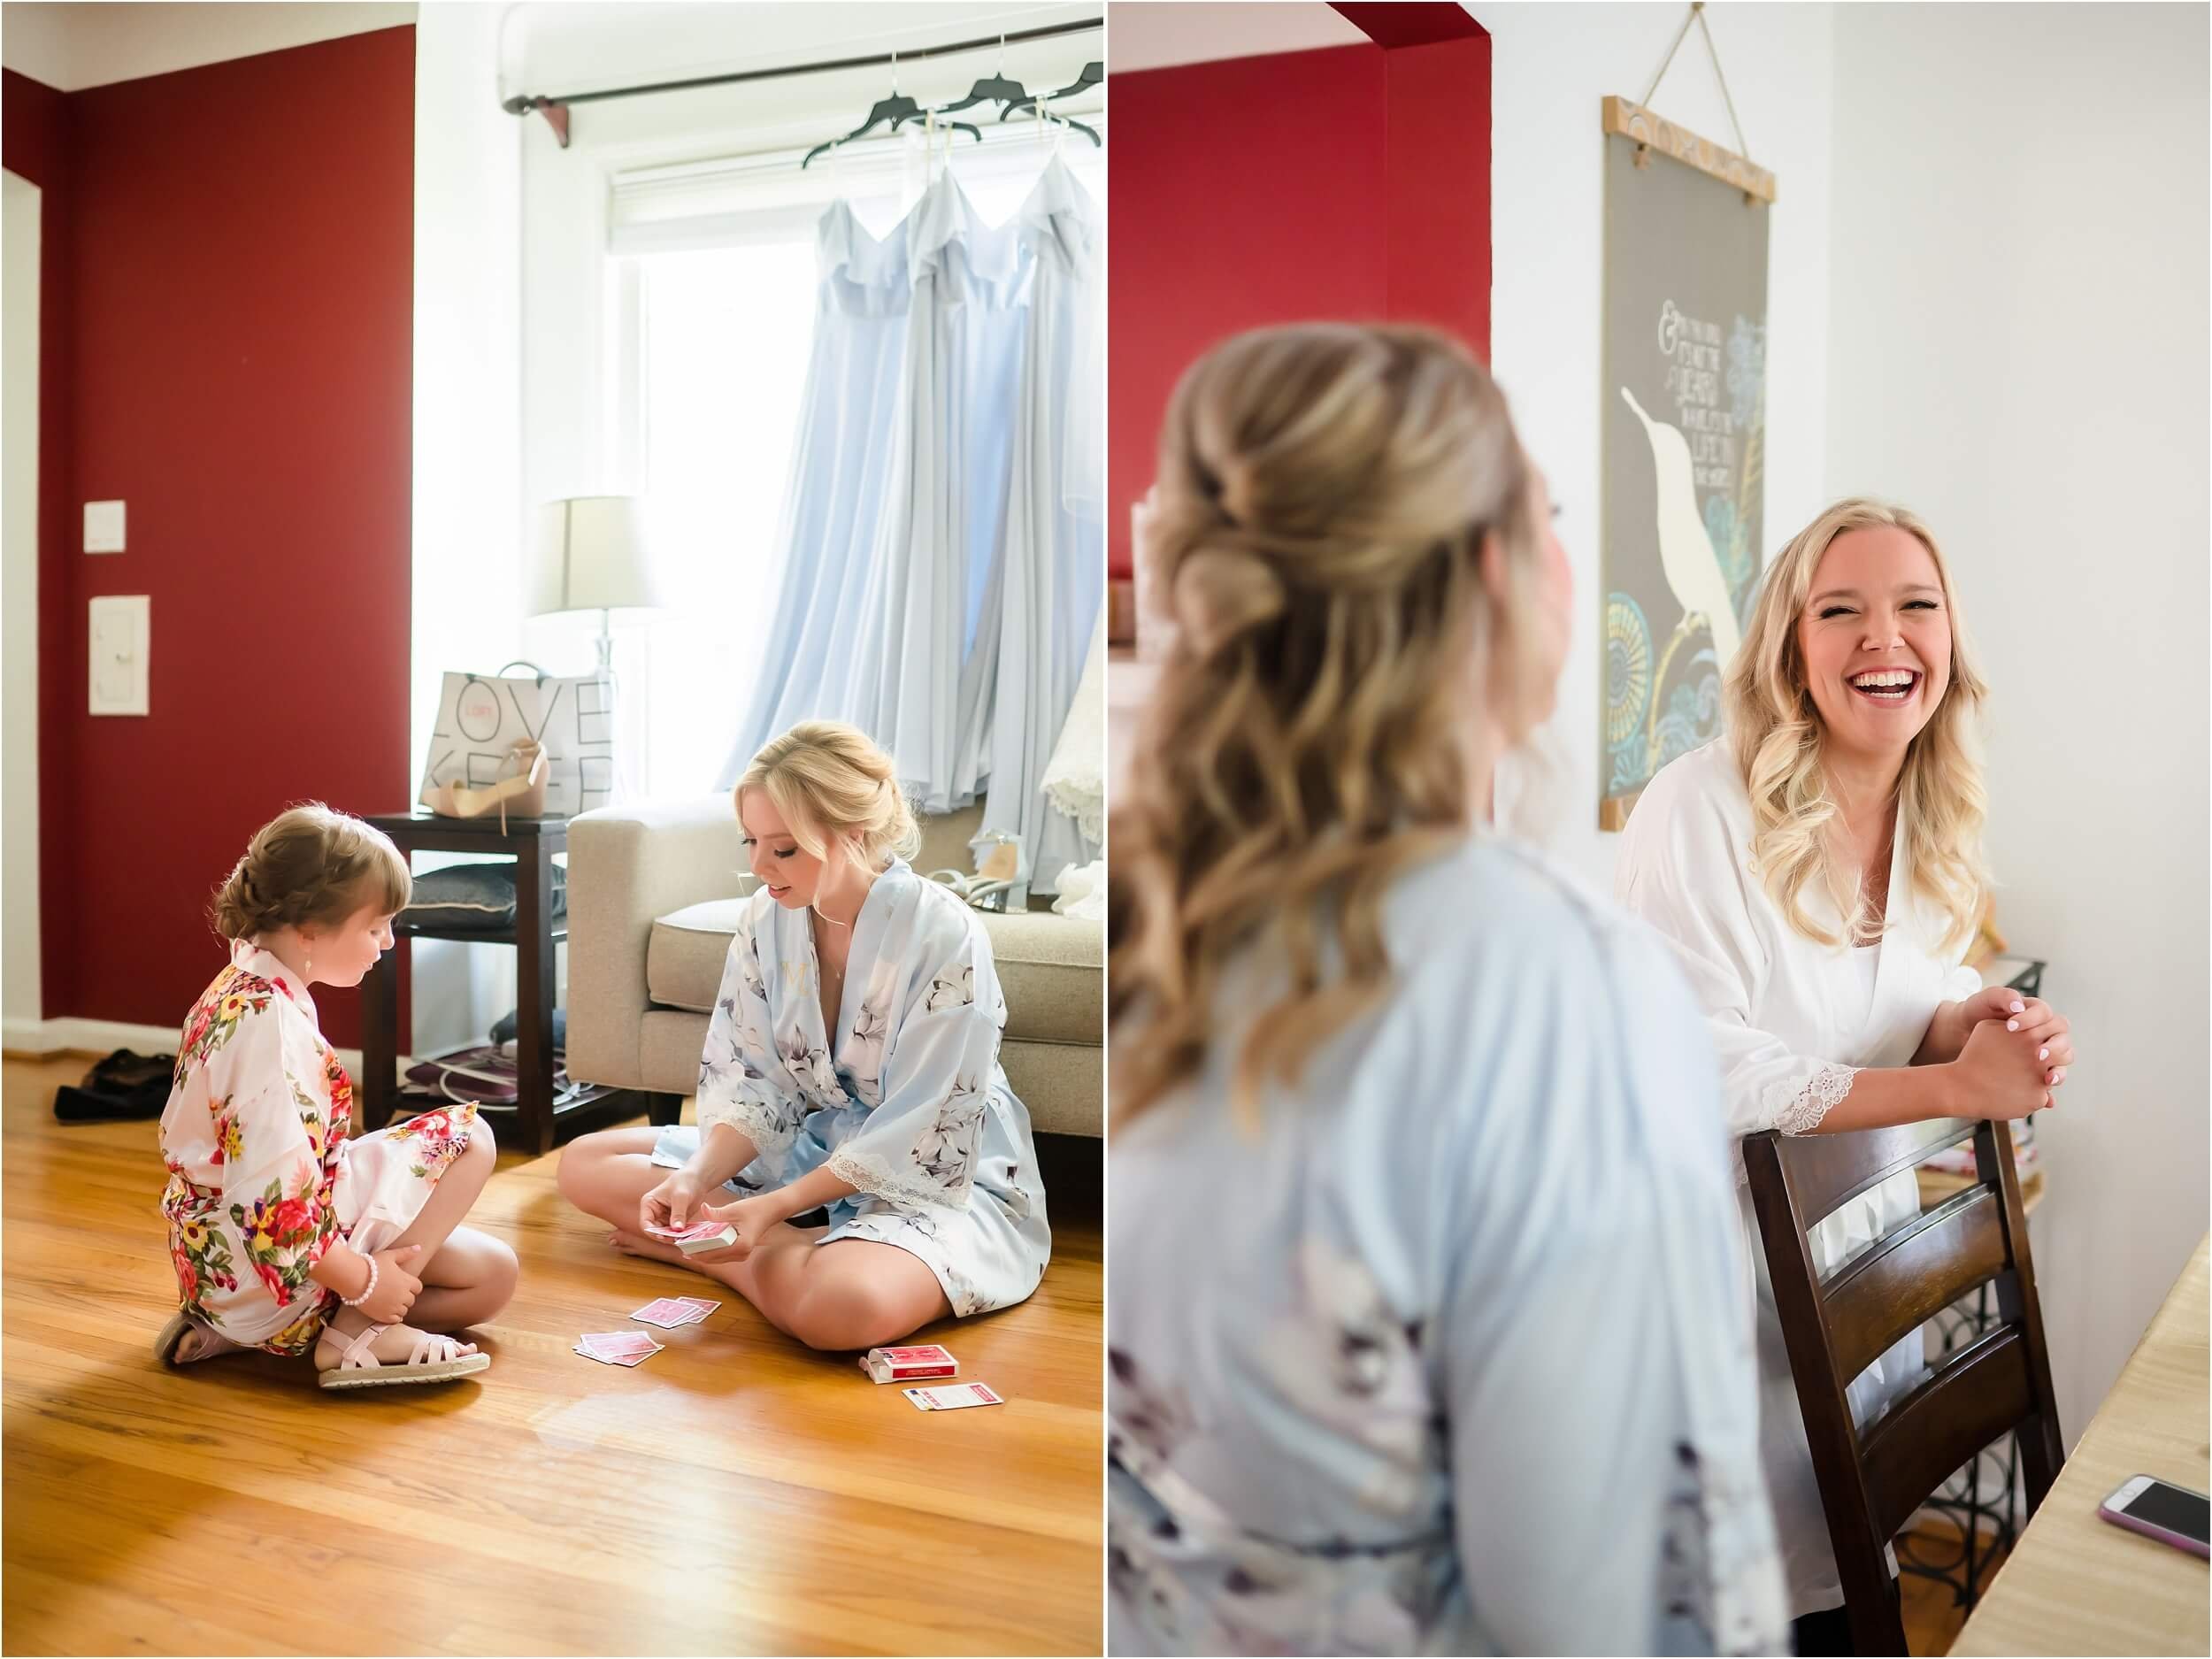  A bride and her friends get ready before a summer wedding at a local catholic church.  